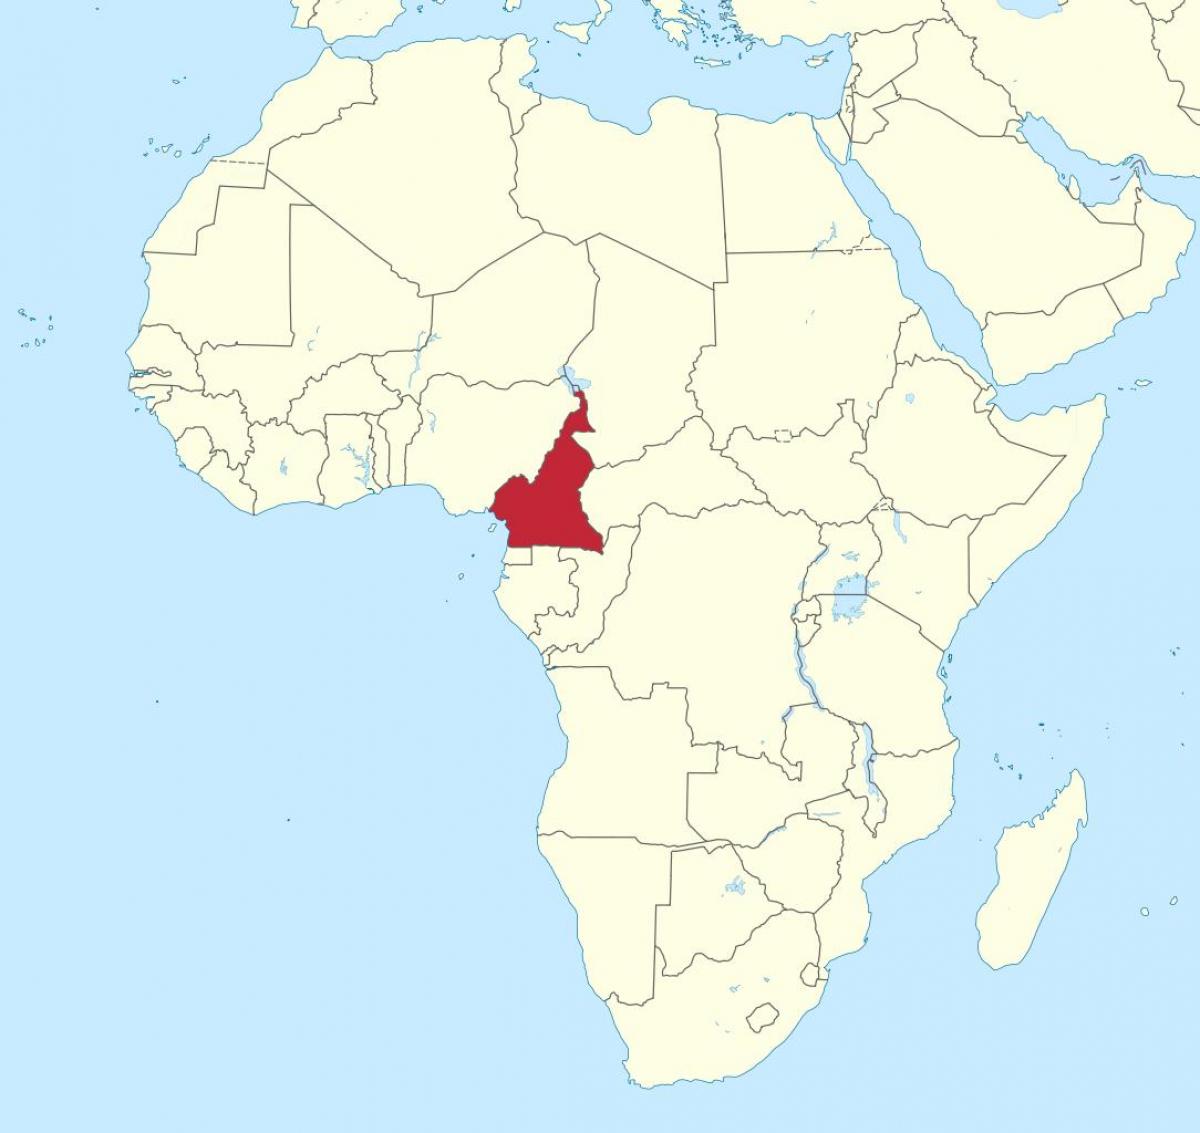 Map of Cameroon west africa